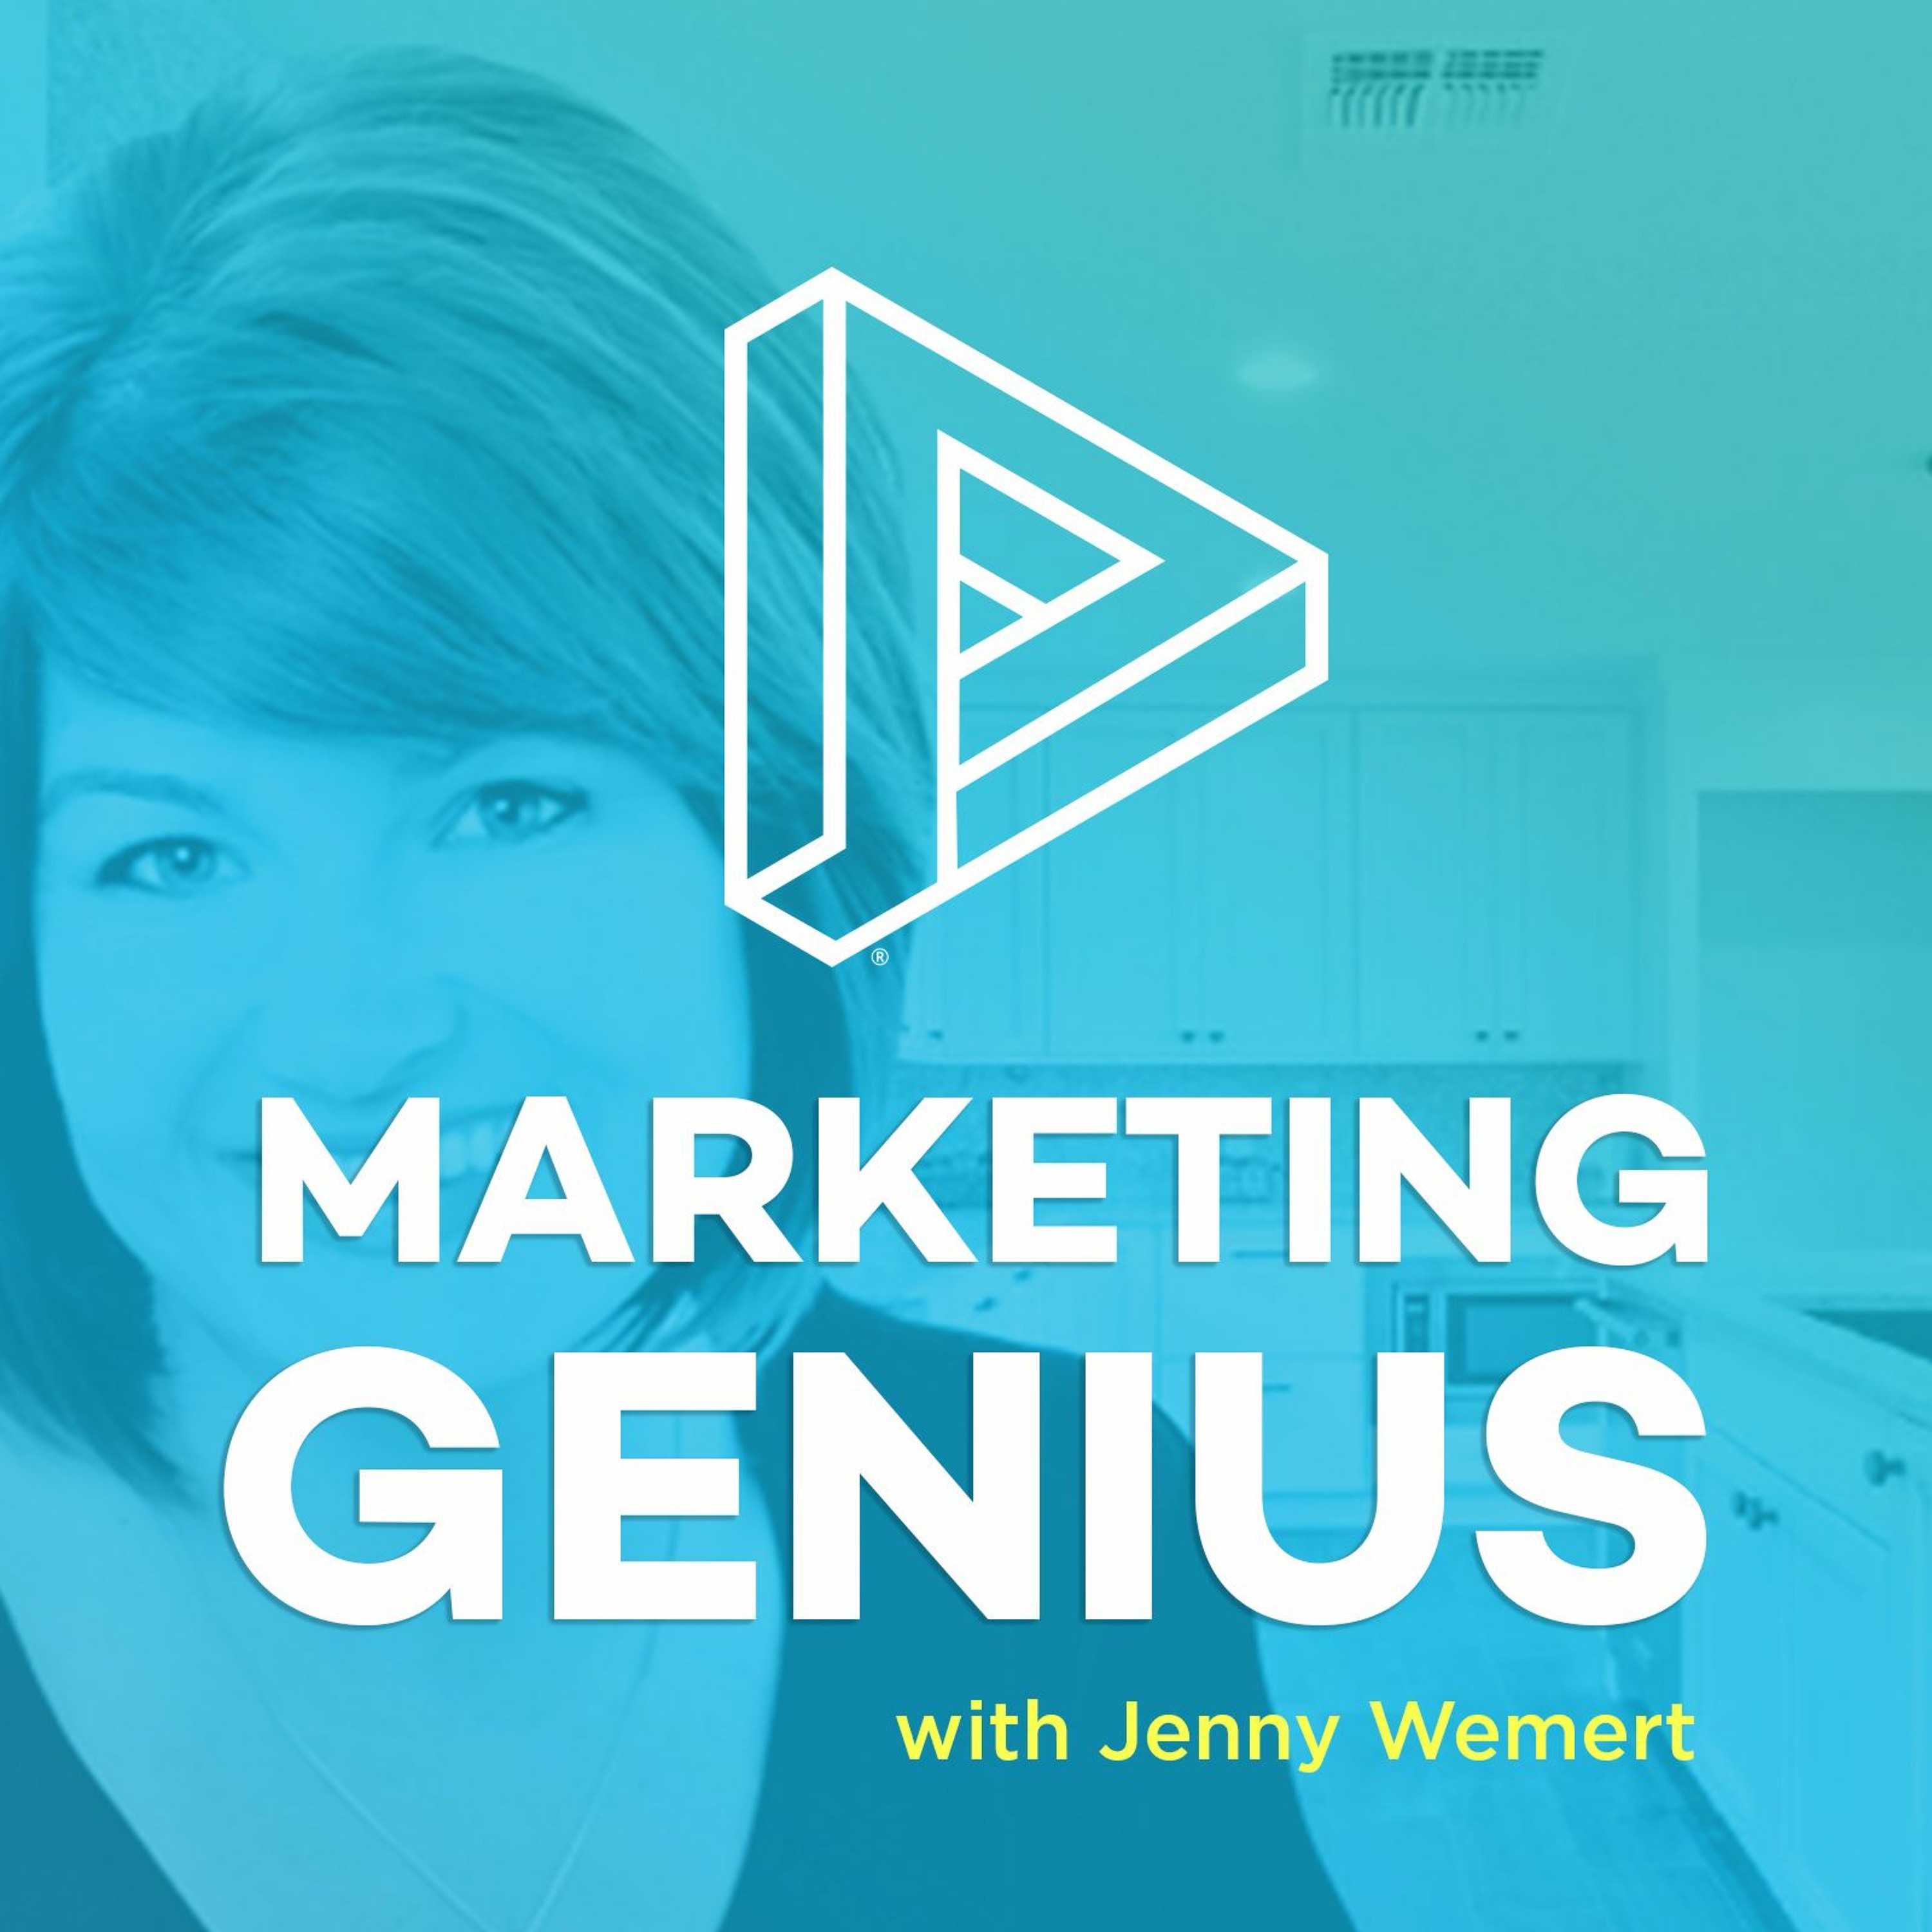 Leveraging Loyalty with Jenny Wemert